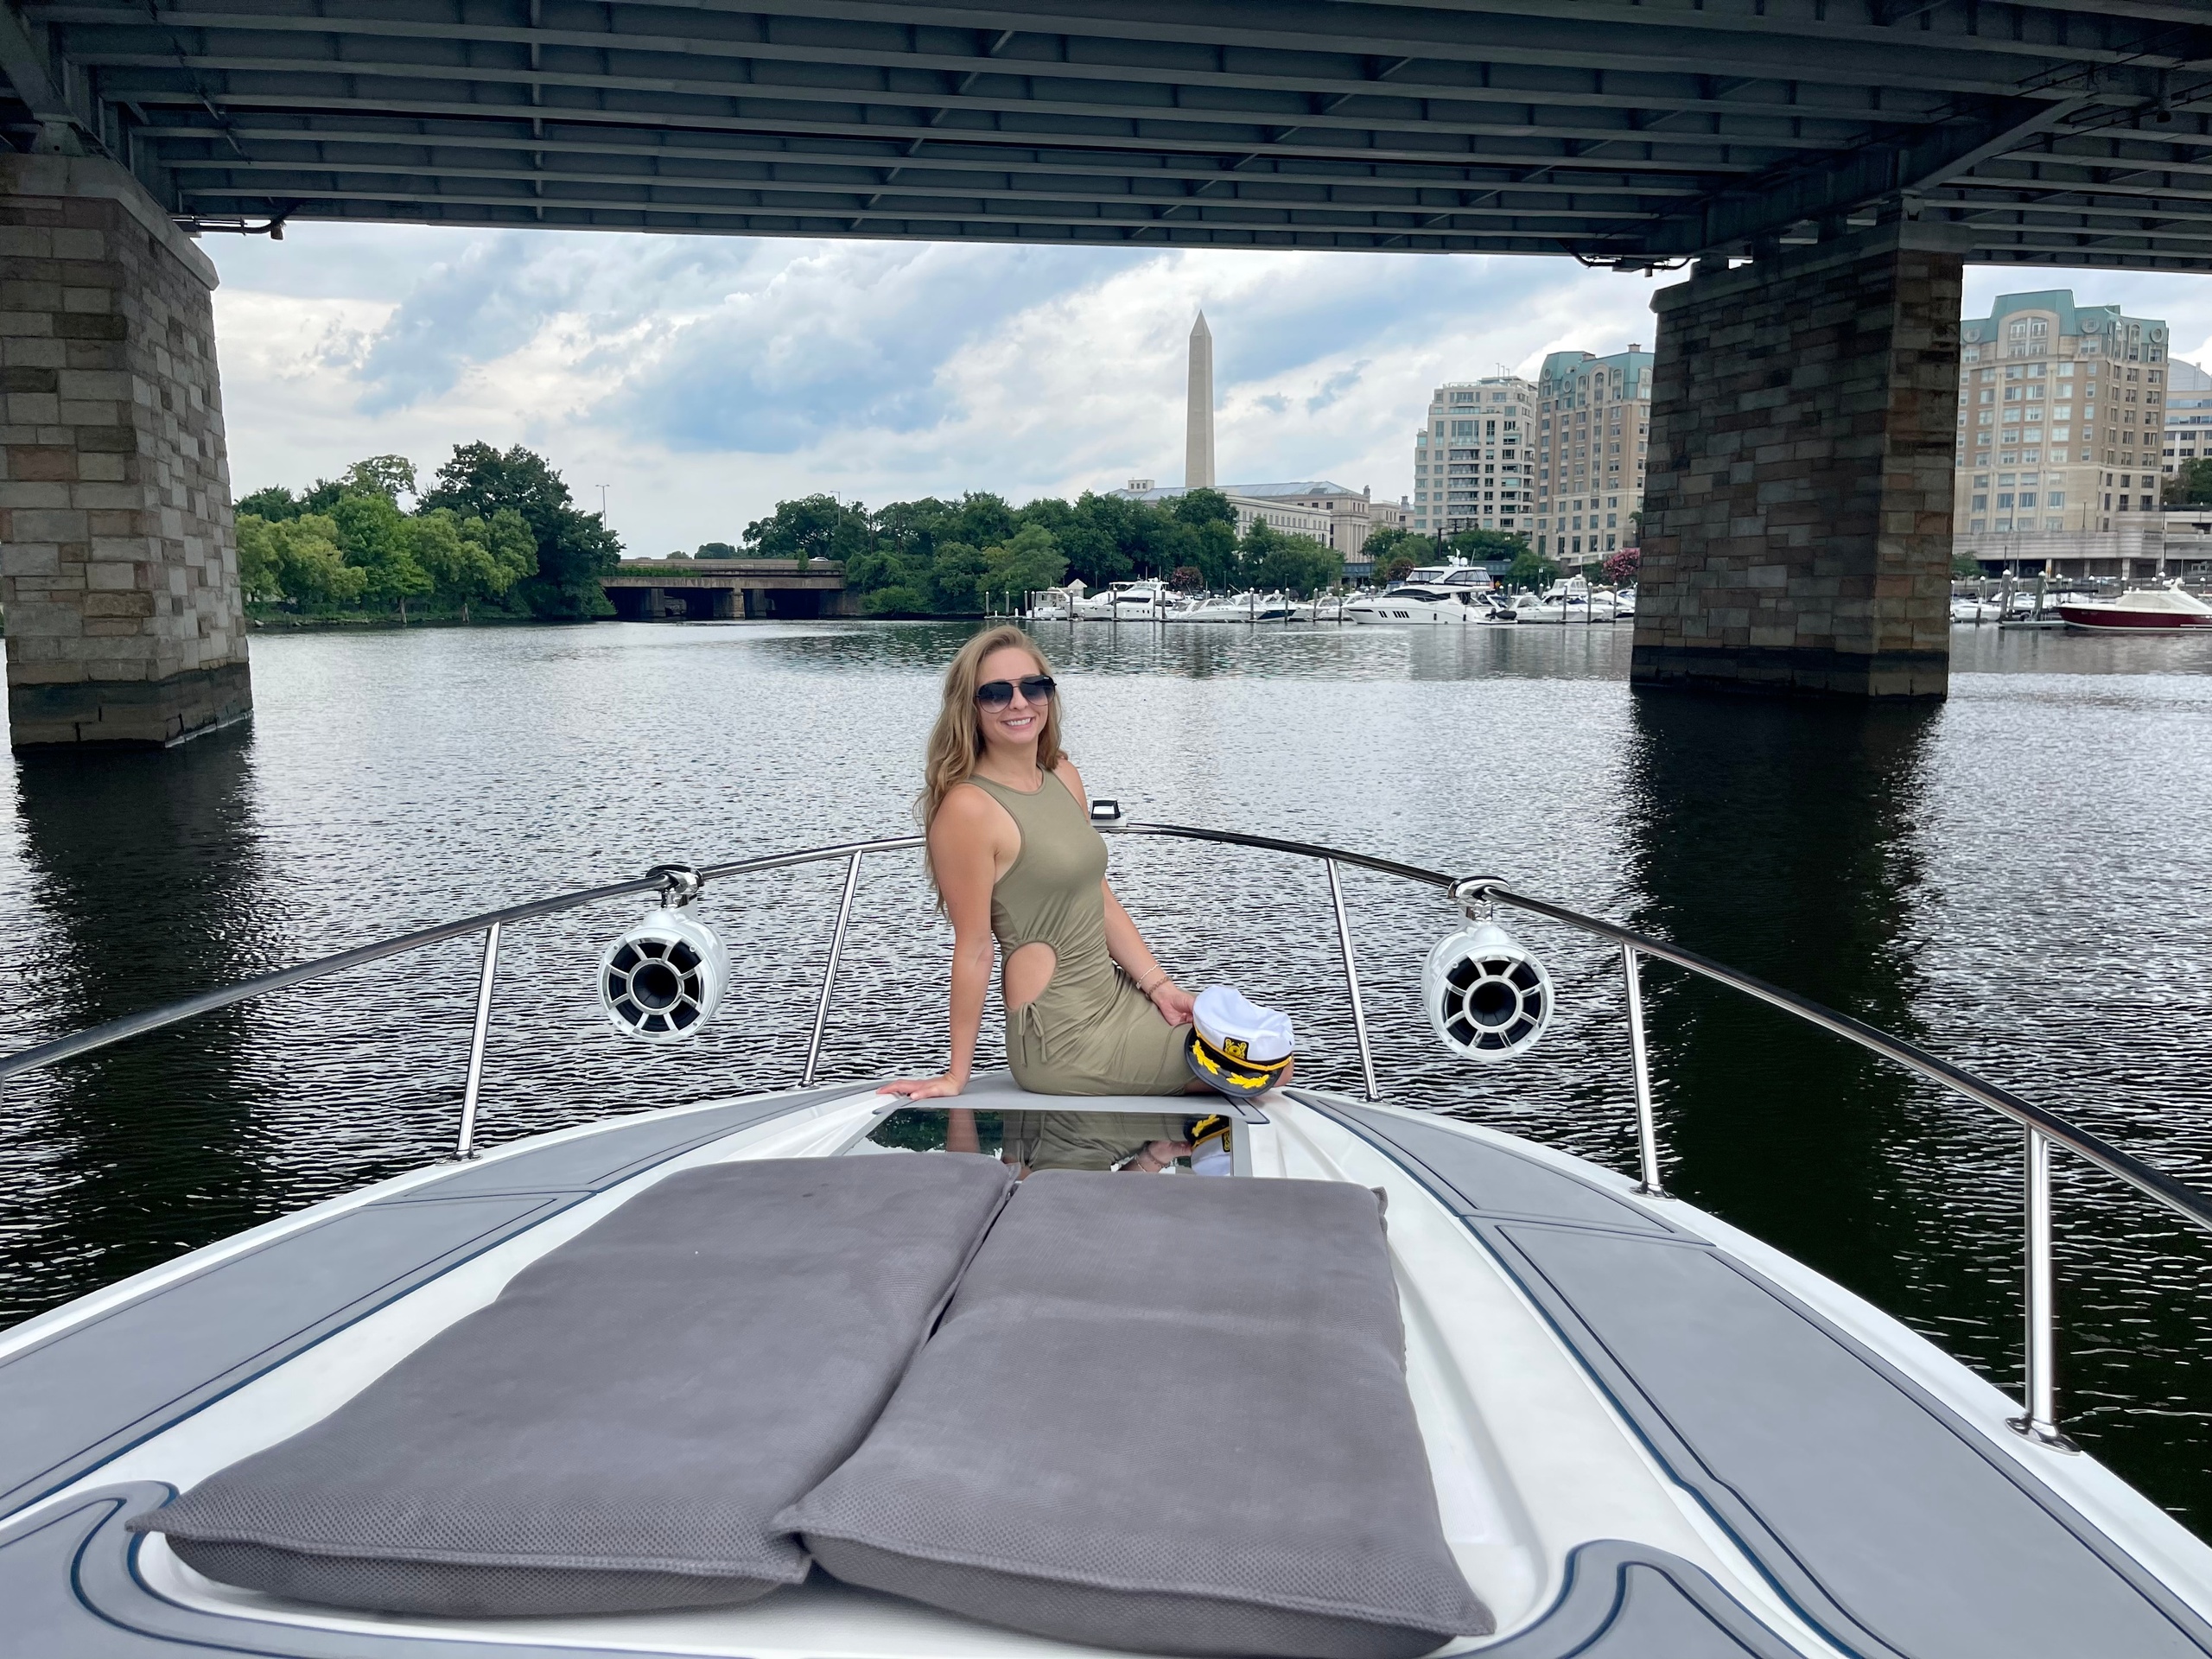 Private BYOB CamJoy Yacht Charter from the Georgetown Waterfront (Up to 6 Passengers) image 12